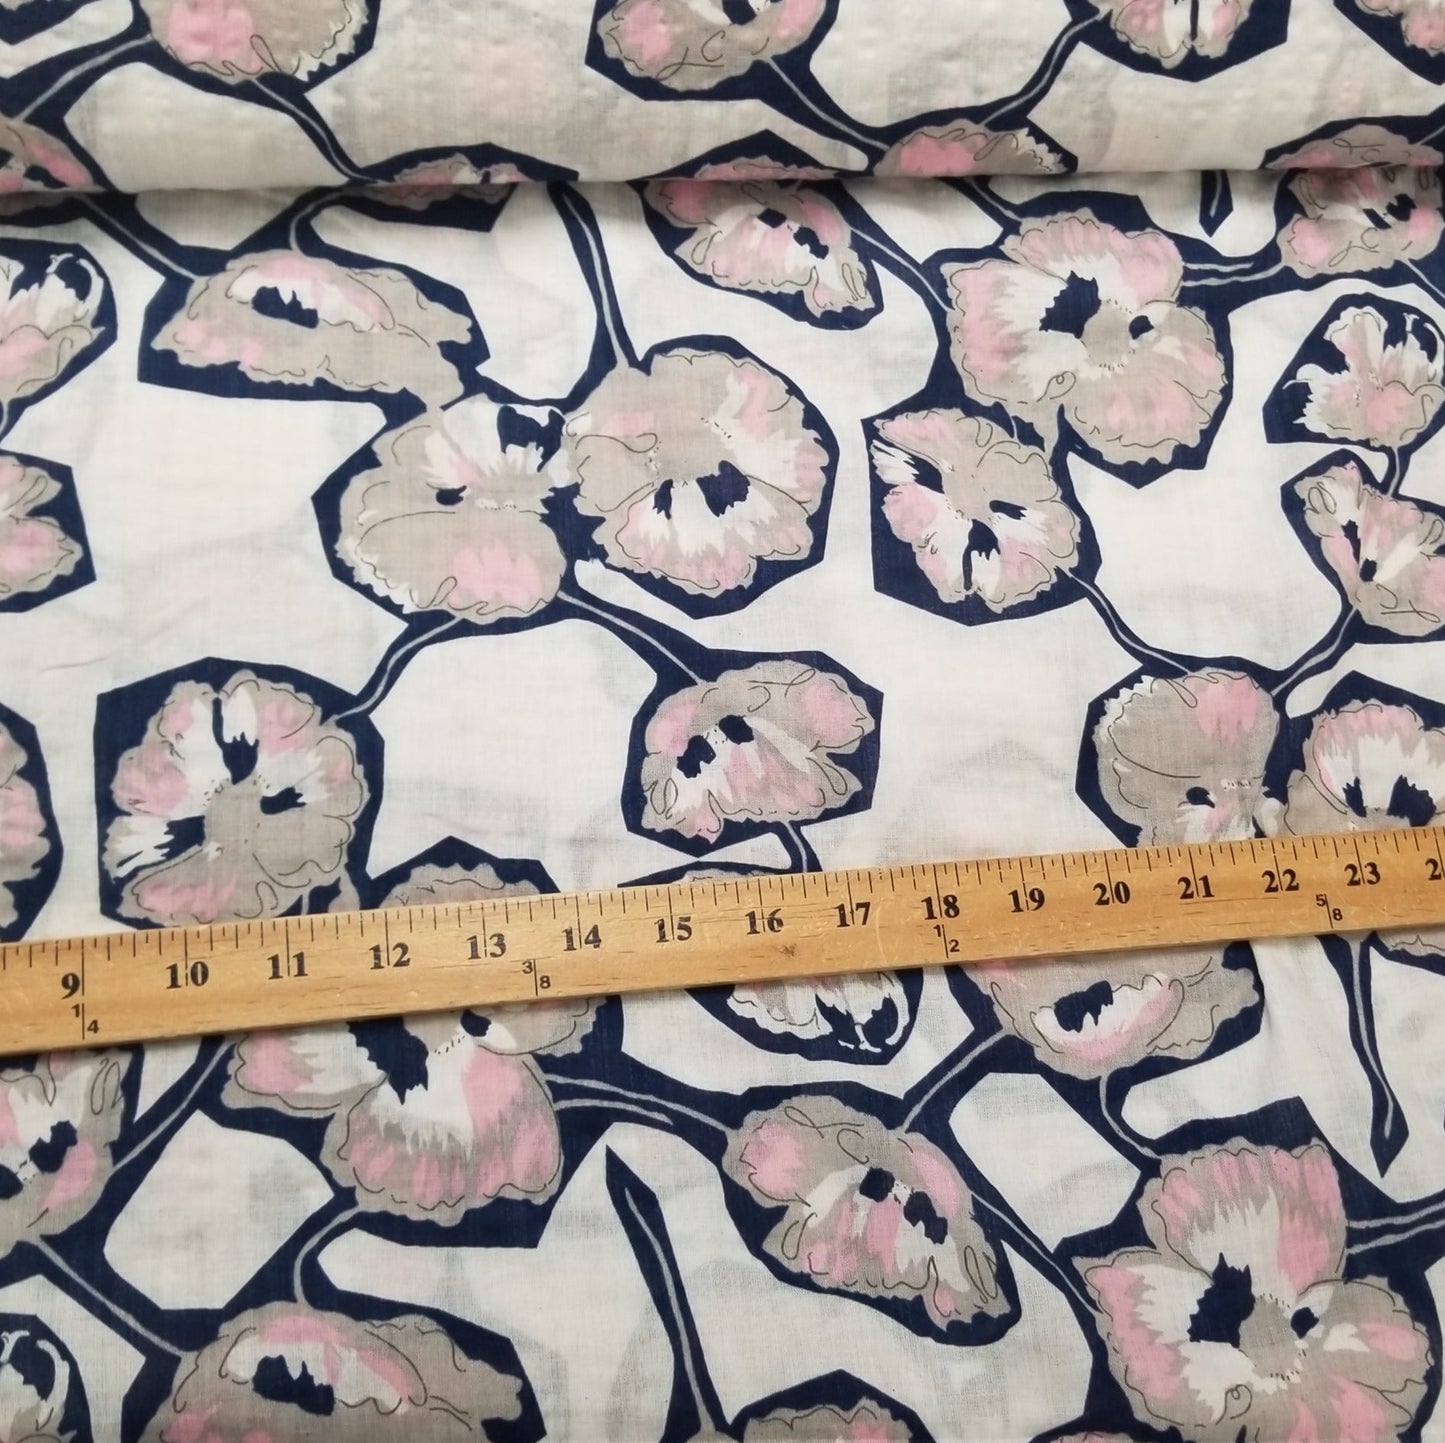 Designer Deadstock Ivory Floral Pink and Grey Cotton Lawn 2.36 oz - Sold by the yard